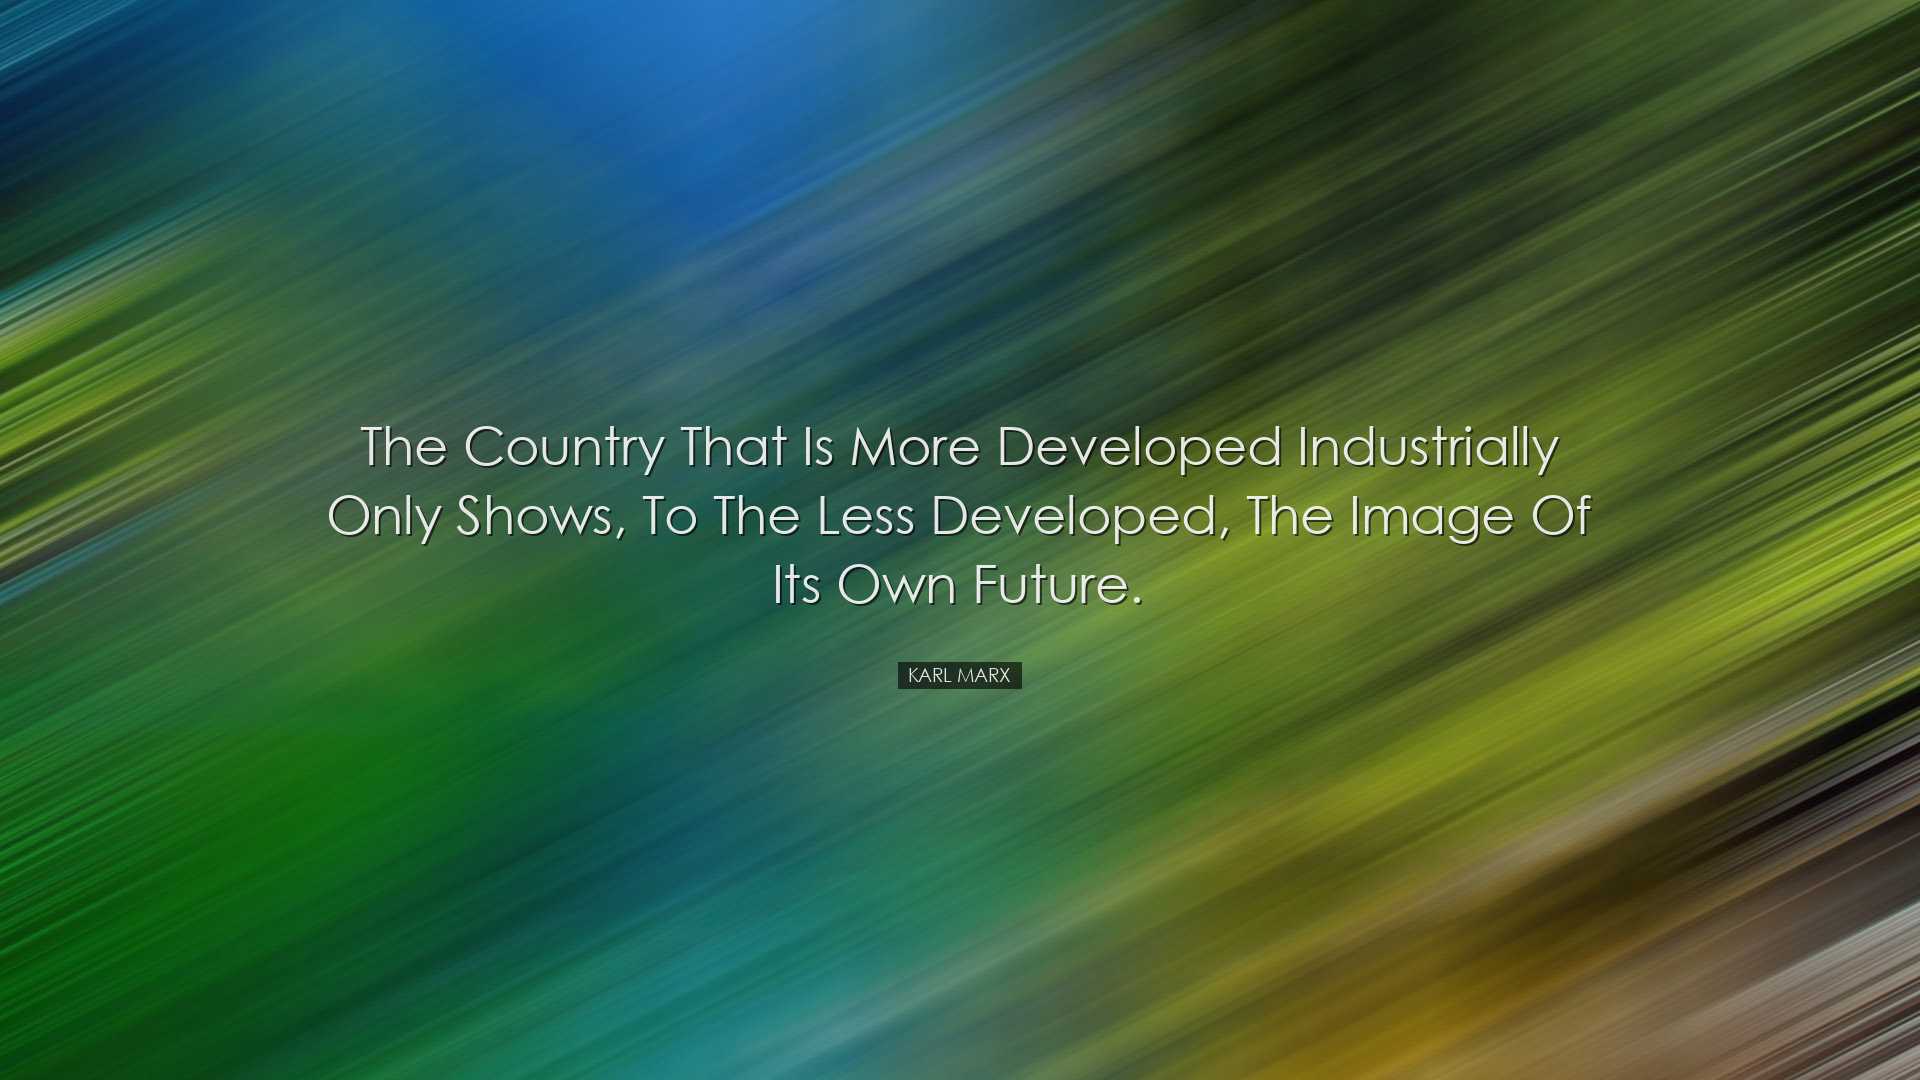 The country that is more developed industrially only shows, to the